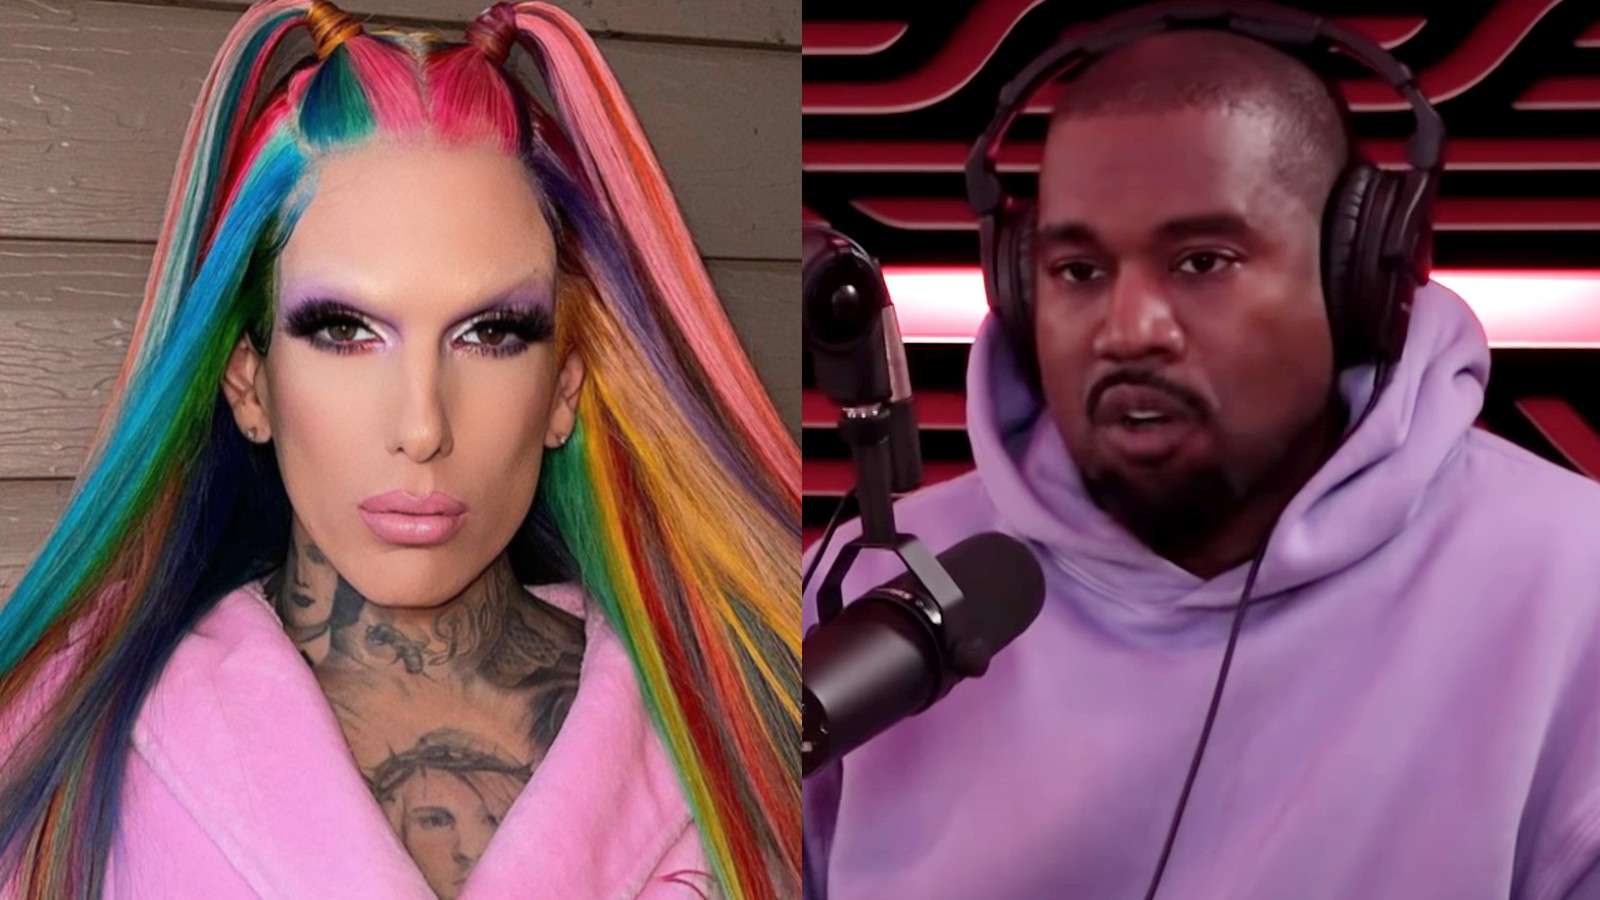 Jeffree star in an Instagram photo next to Kanye West on the Joe Rogan podcast